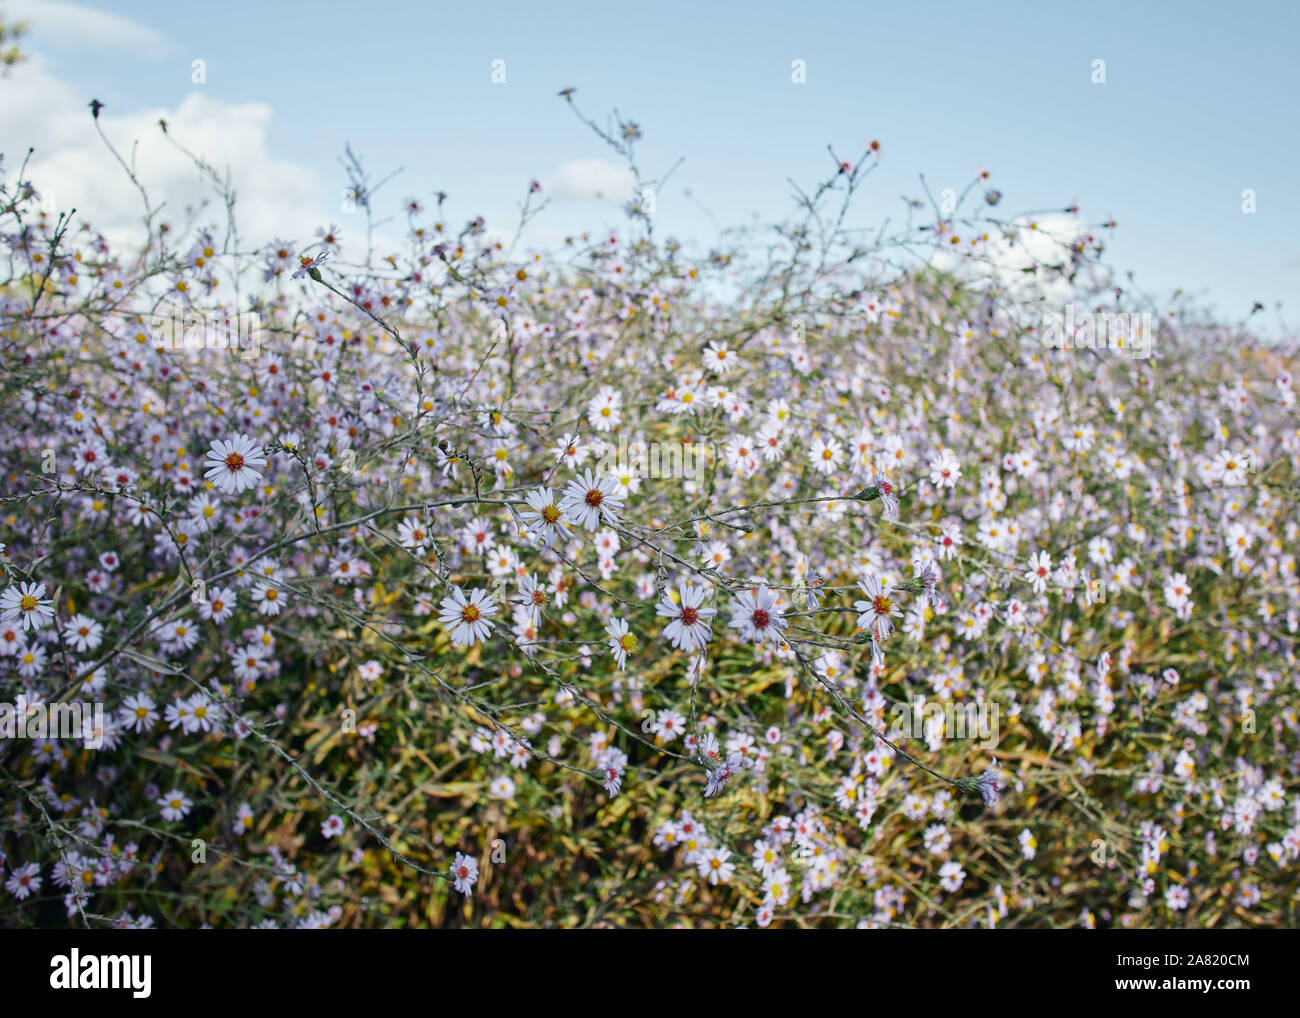 A beautiful spread of wild Marguerite daisy flowers on a calm sunny day. Stock Photo